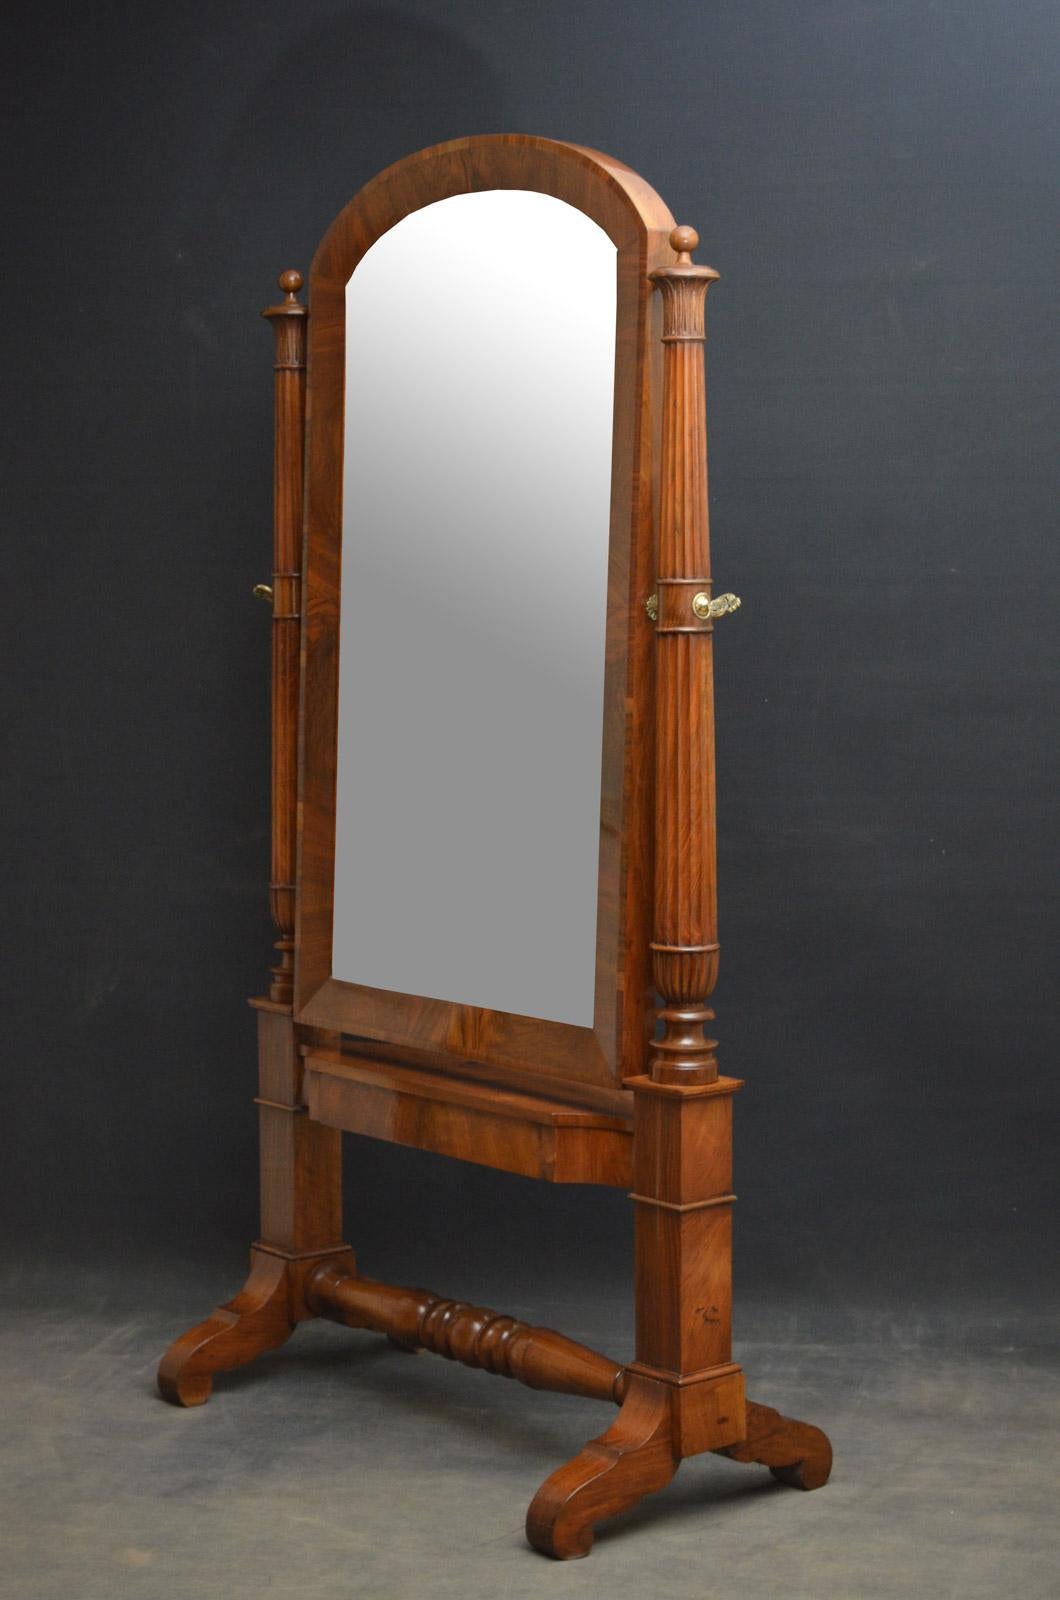 Sn3697 fine quality and very elegant, Continental olivewood cheval mirror, having original mirror plate in arched and figured frame supported on tapering, reeded uprights with finely carved decoration to top, terminating in robust base with drawer